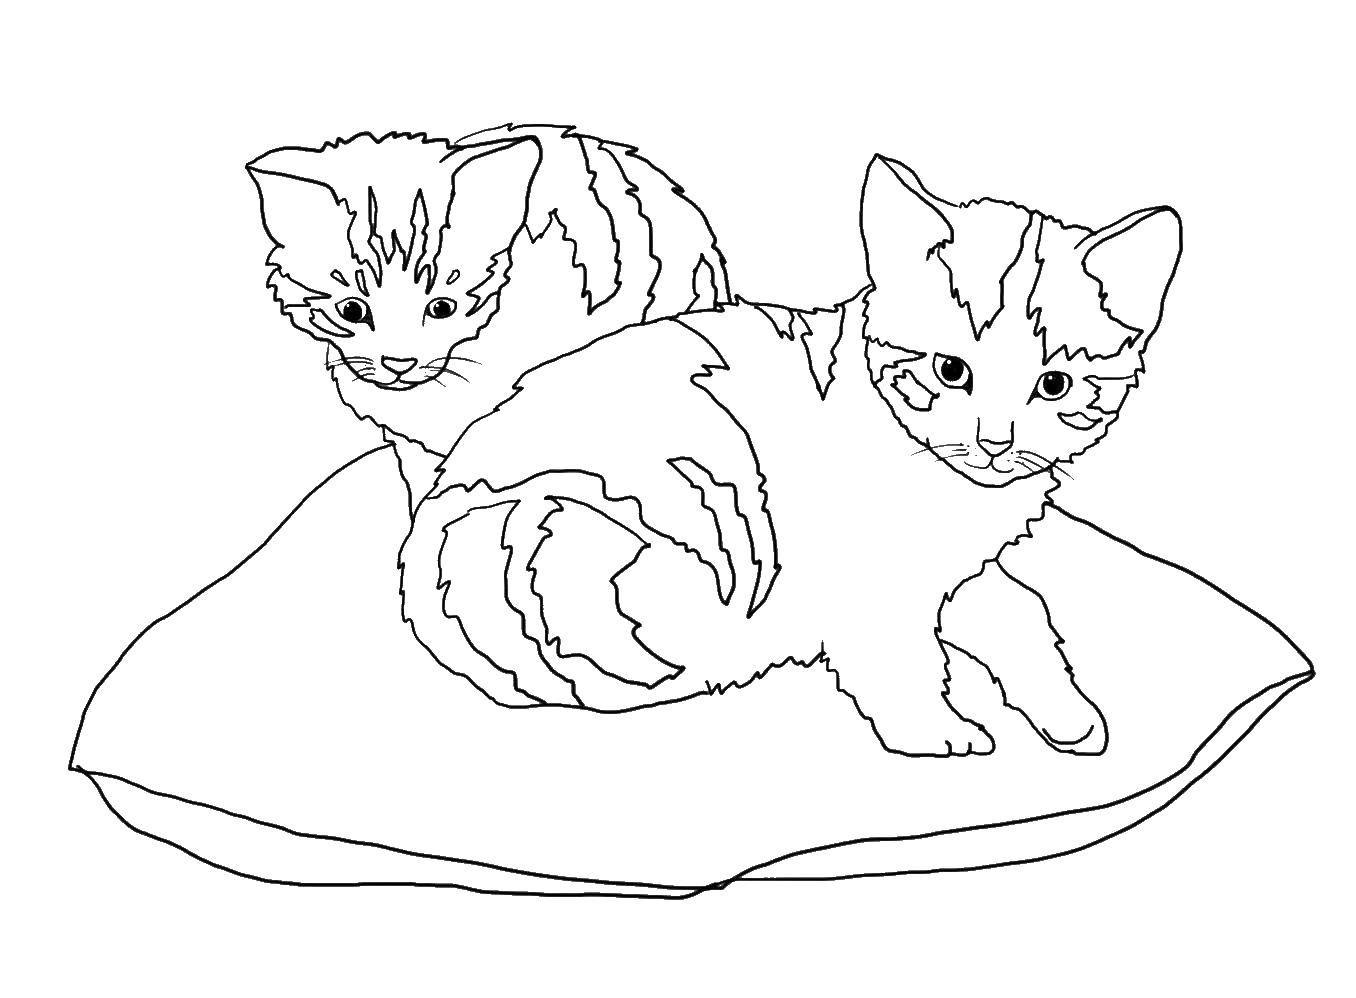 Coloring Kittens on the pillow. Category Animals. Tags:  Animals, kitten.